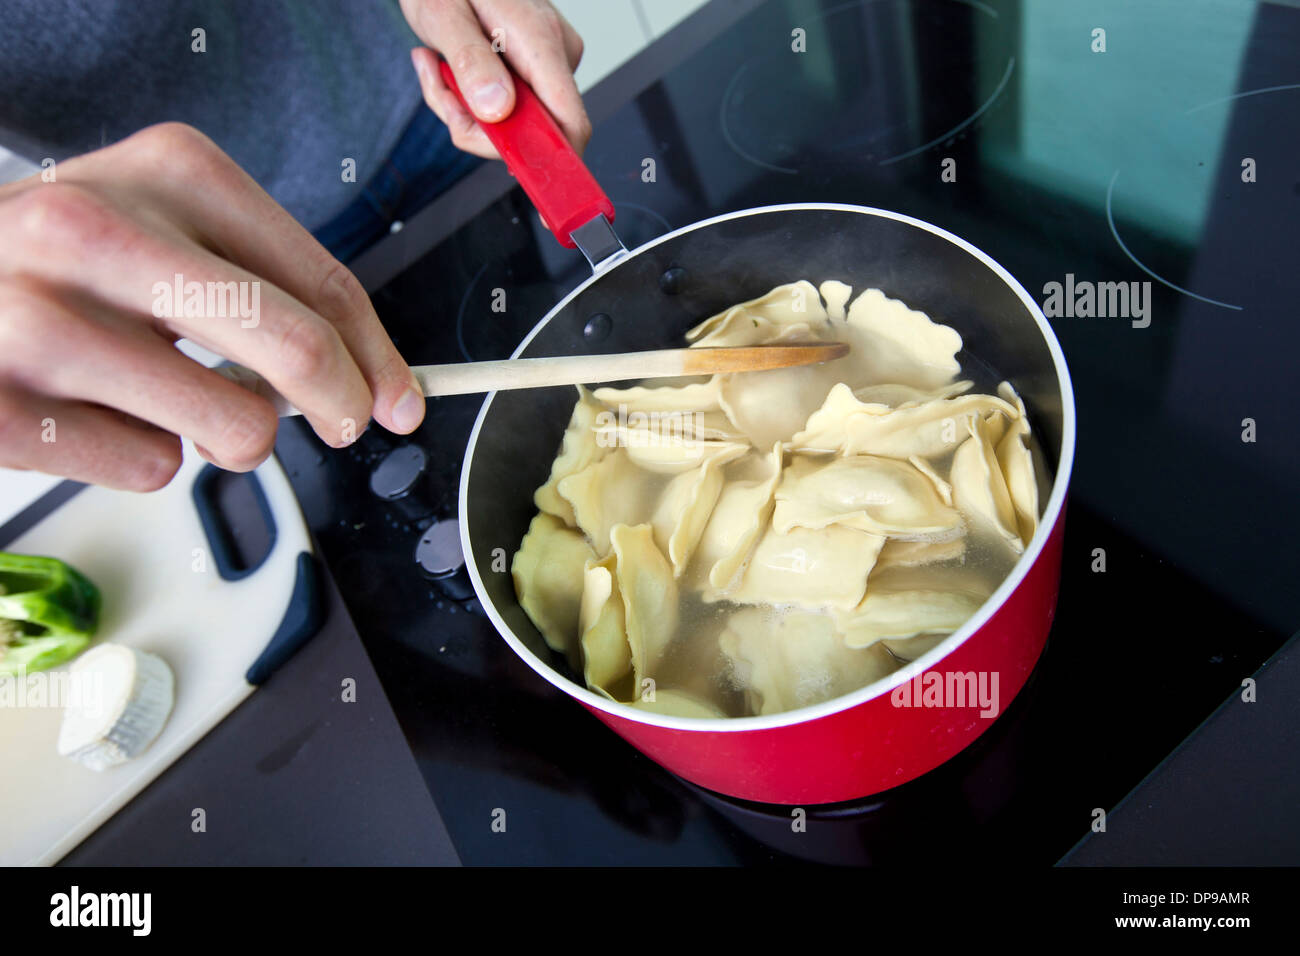 Midsection of man cooking pasta on stove in kitchen Stock Photo